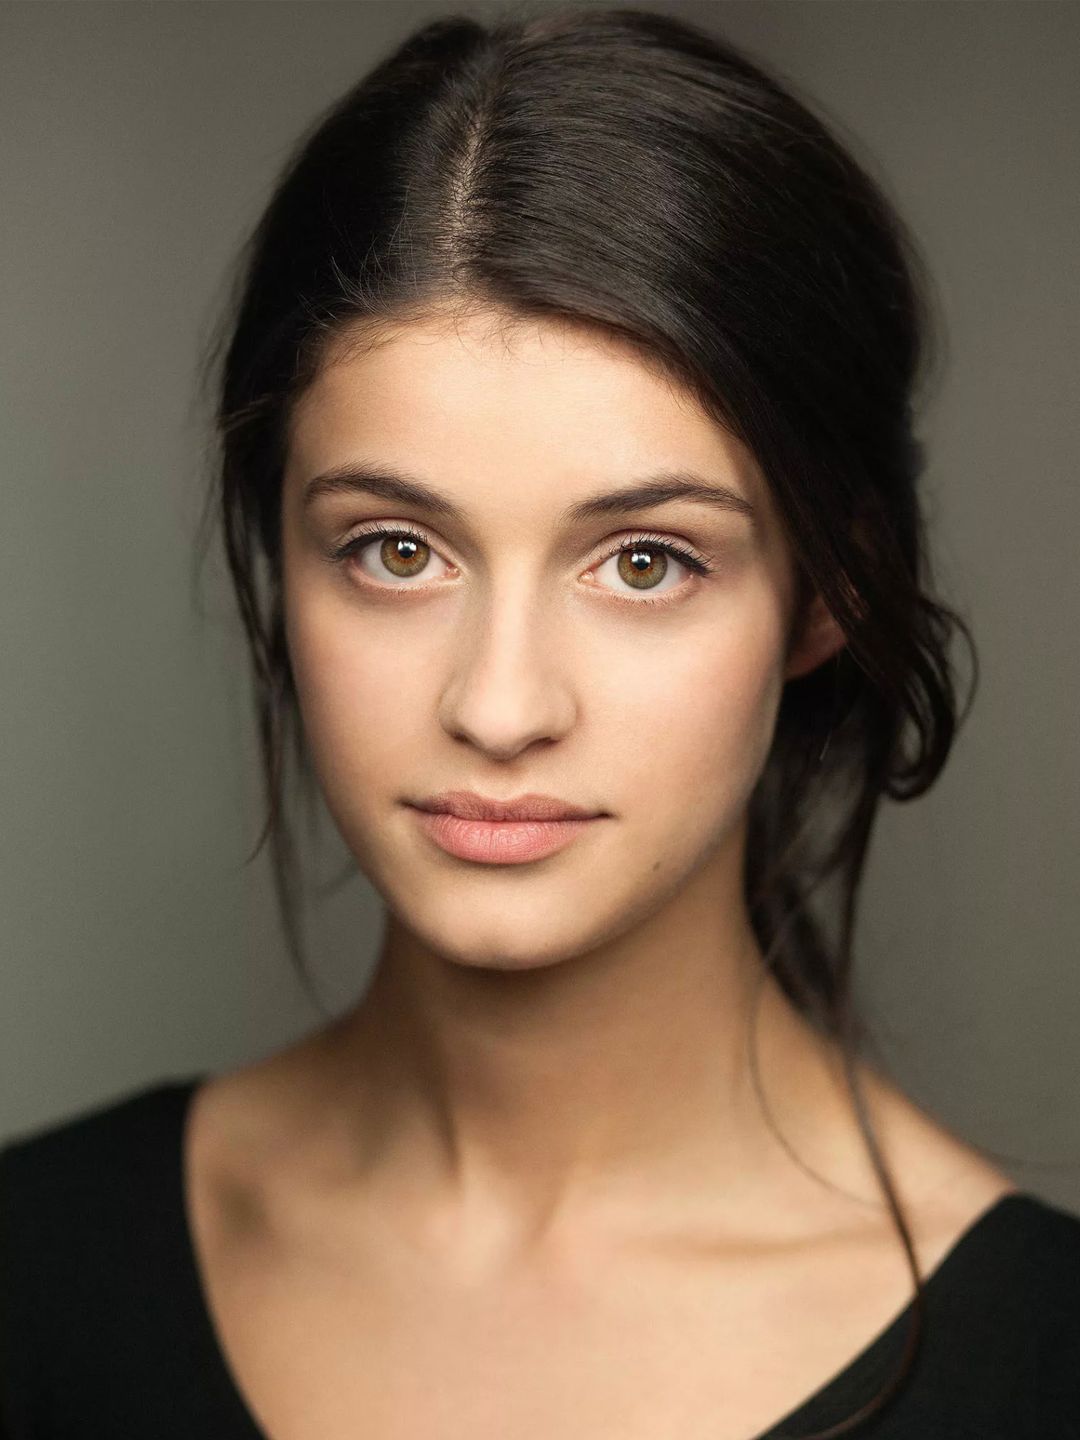 Anya Chalotra height and weight